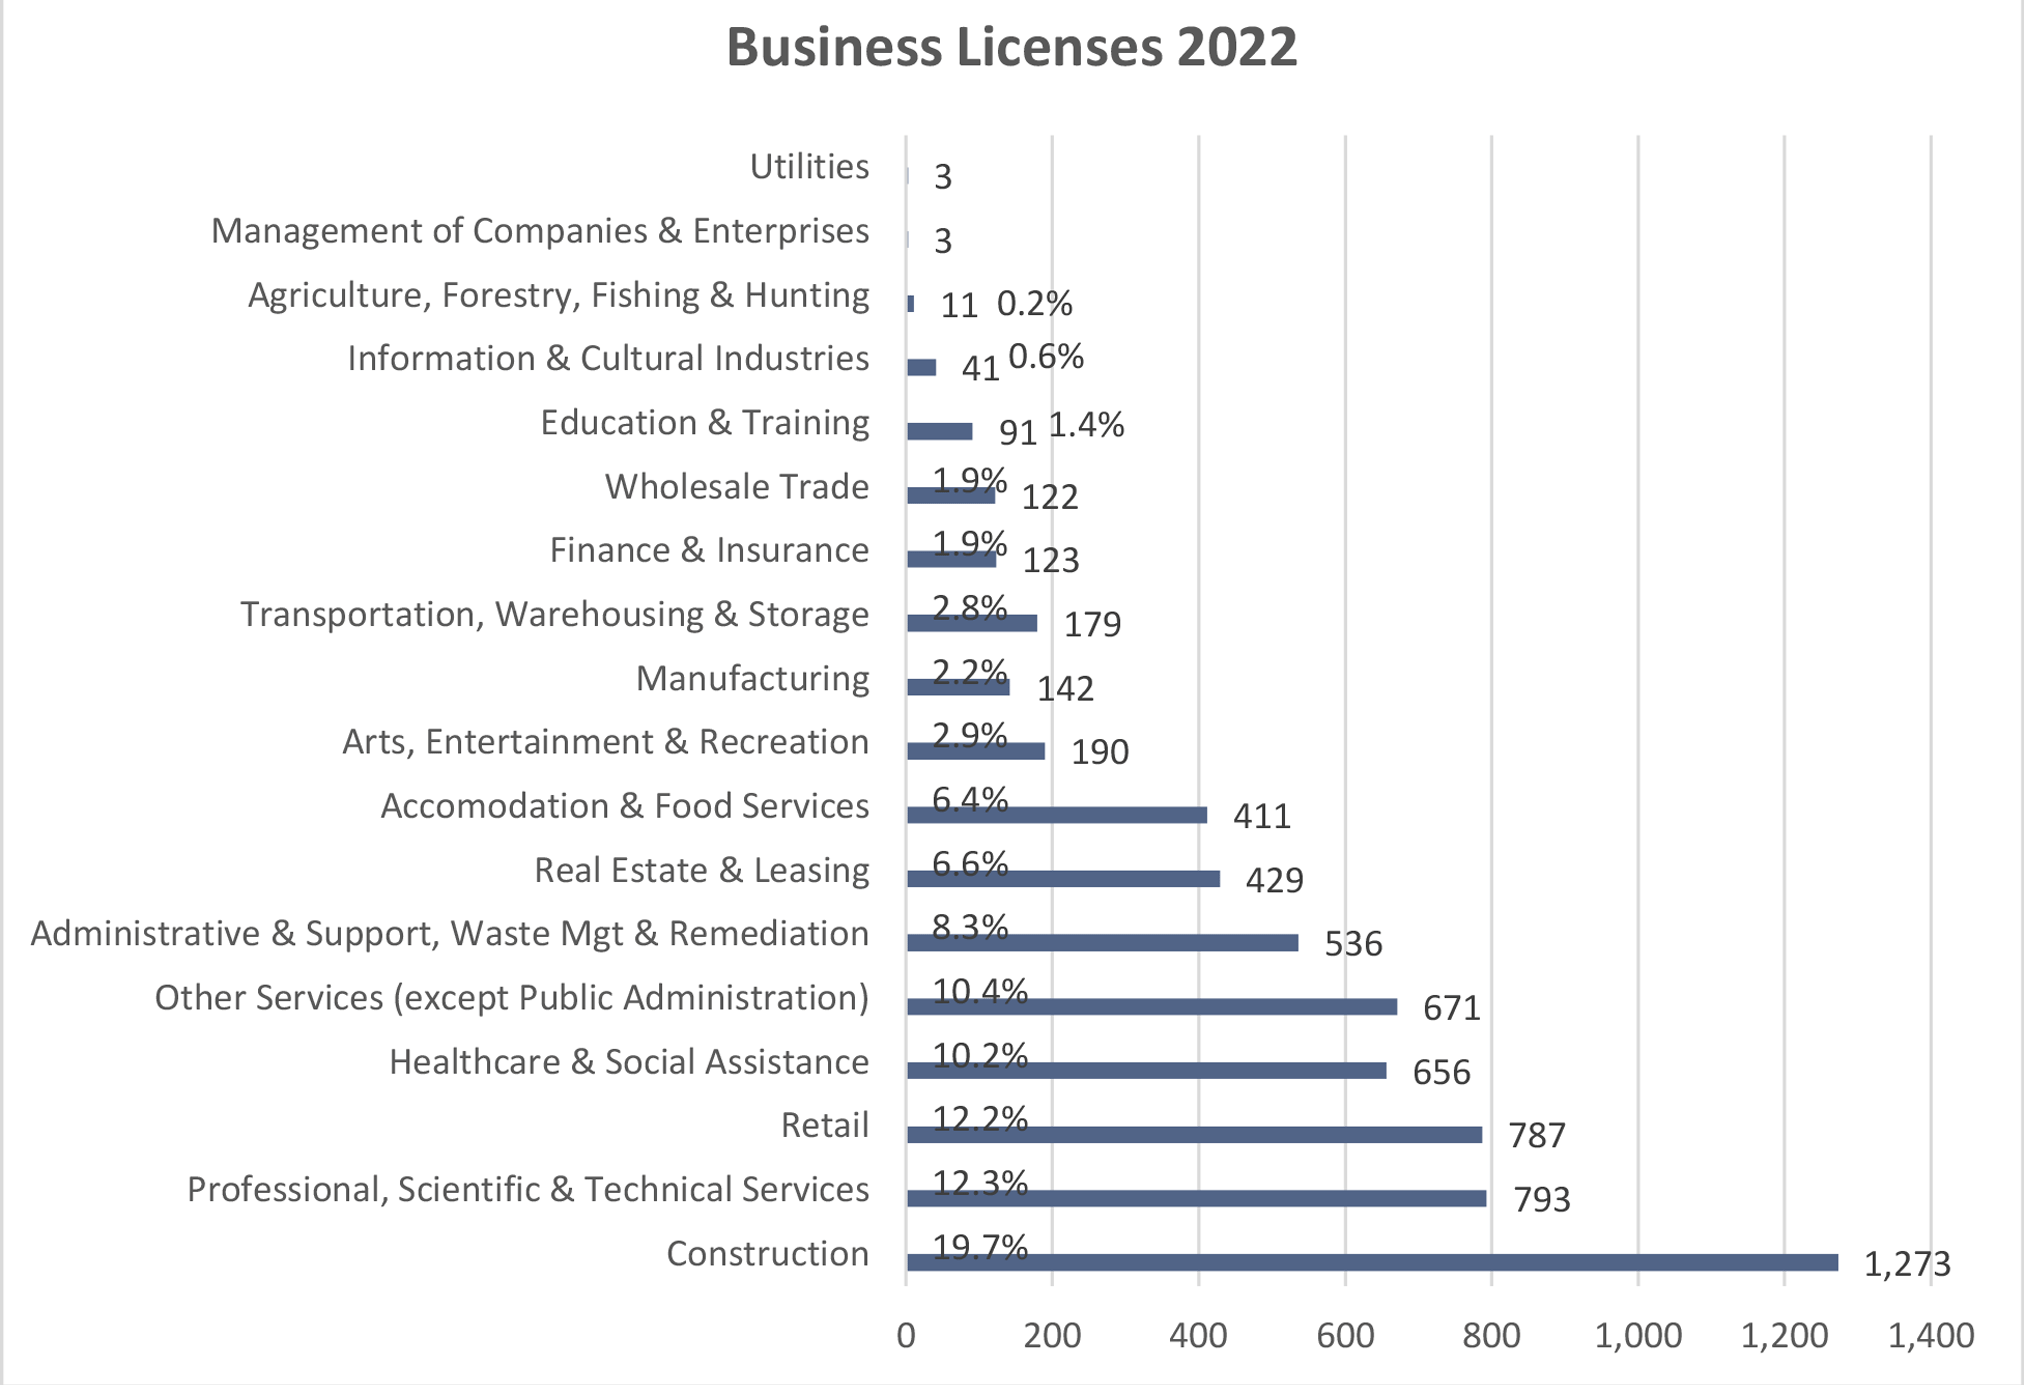 A chart comparing types and numbers of business licenses in Nanaimo for 2022